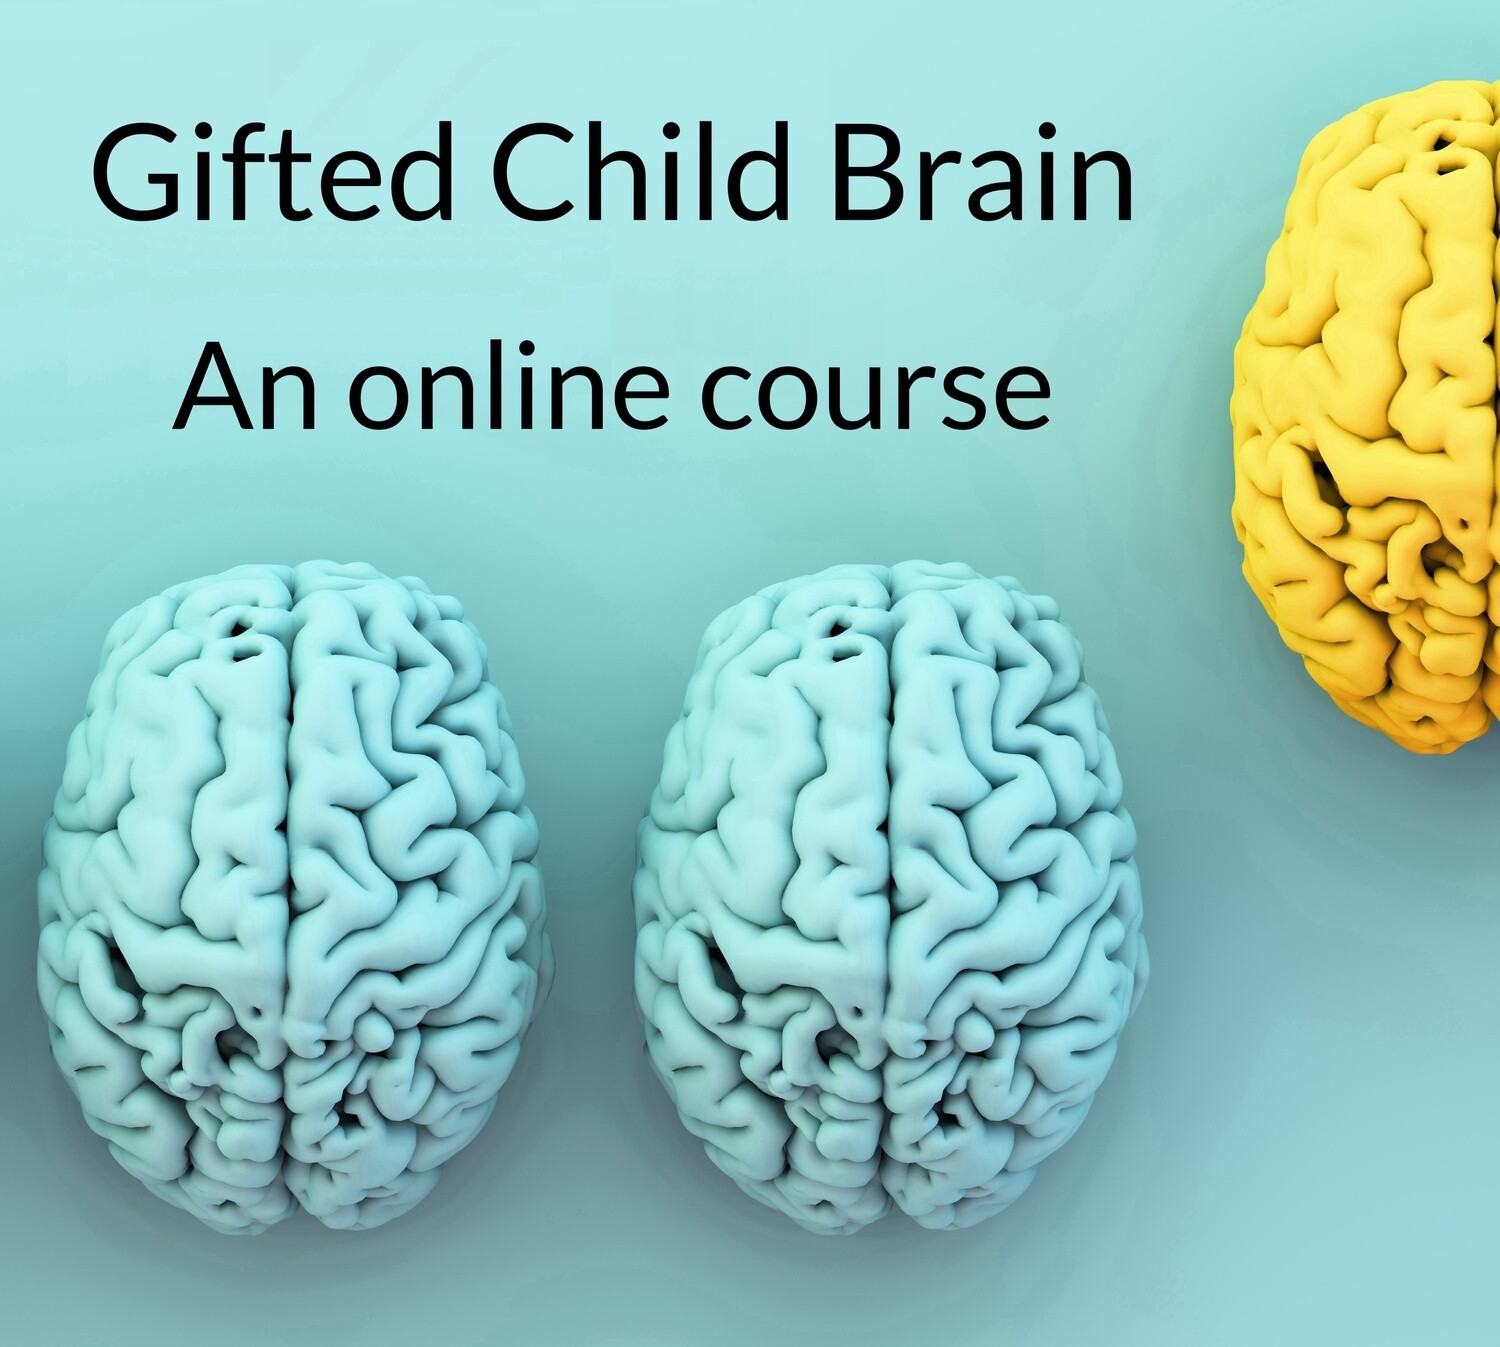 Gifted Child Brain: 4 session online course starting 15 March 2022